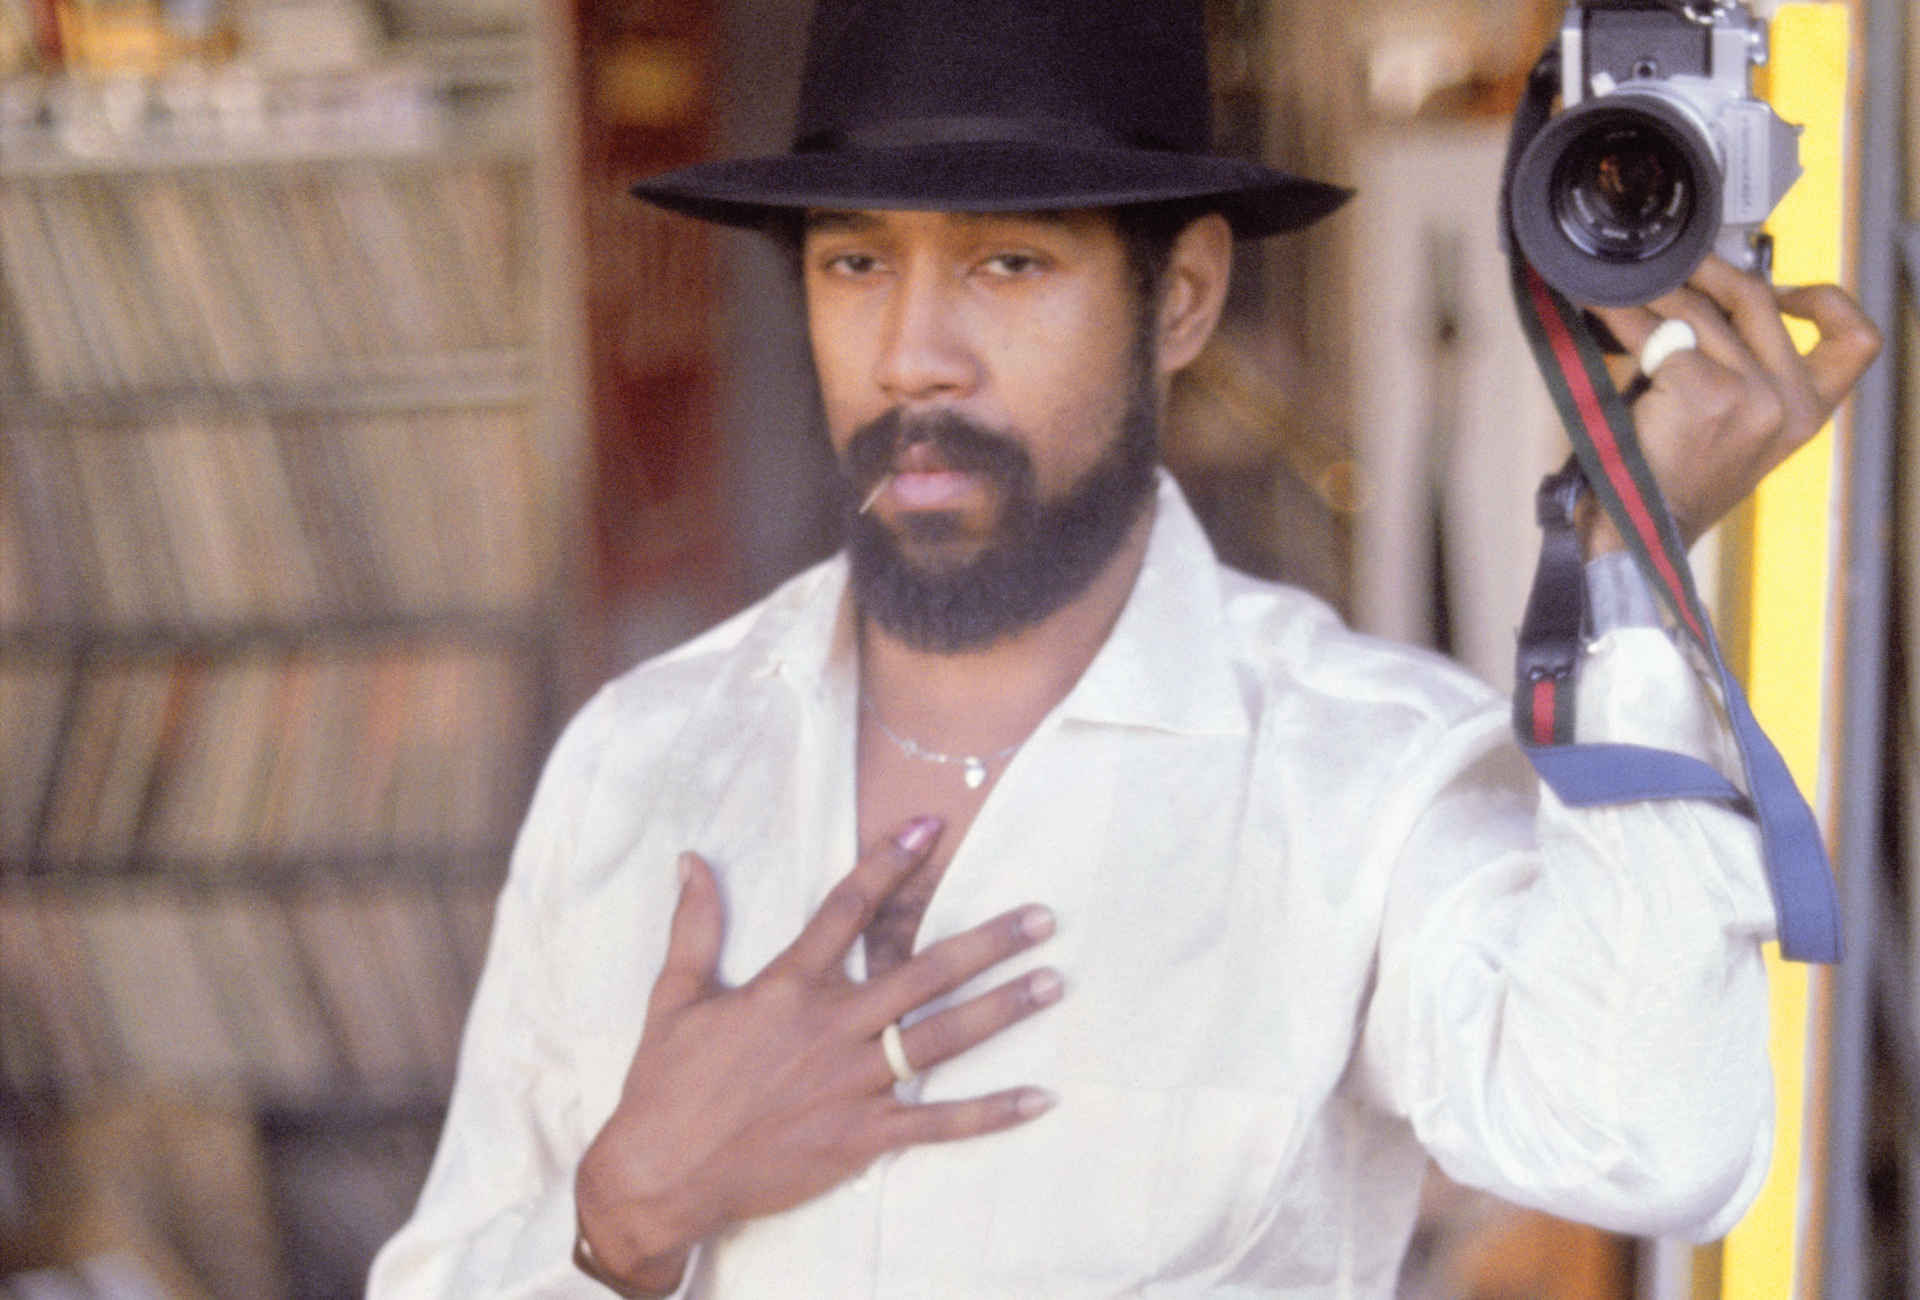 Self-portrait of Barkley L. Hendricks in a white shirt, wearing a black hat and holding a camera